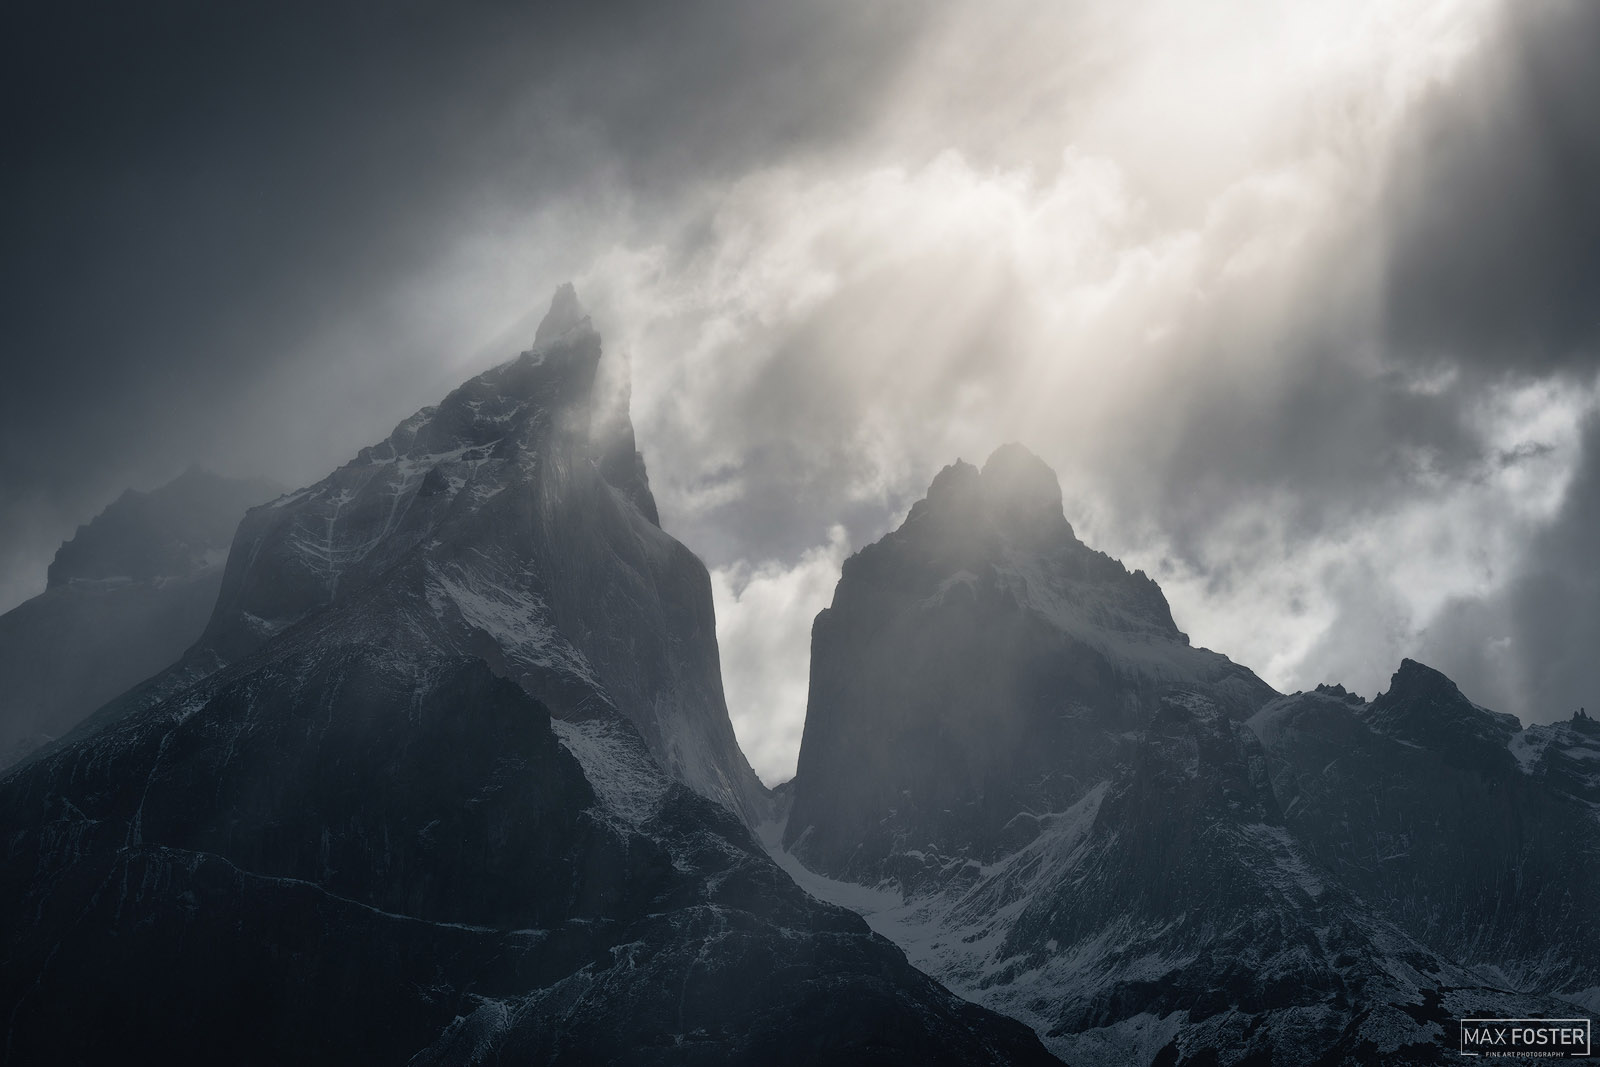 Immerse yourself in beauty with The Showdown, Max Foster's limited edition photographic print of Los Cuernos in Torres Del Paine...